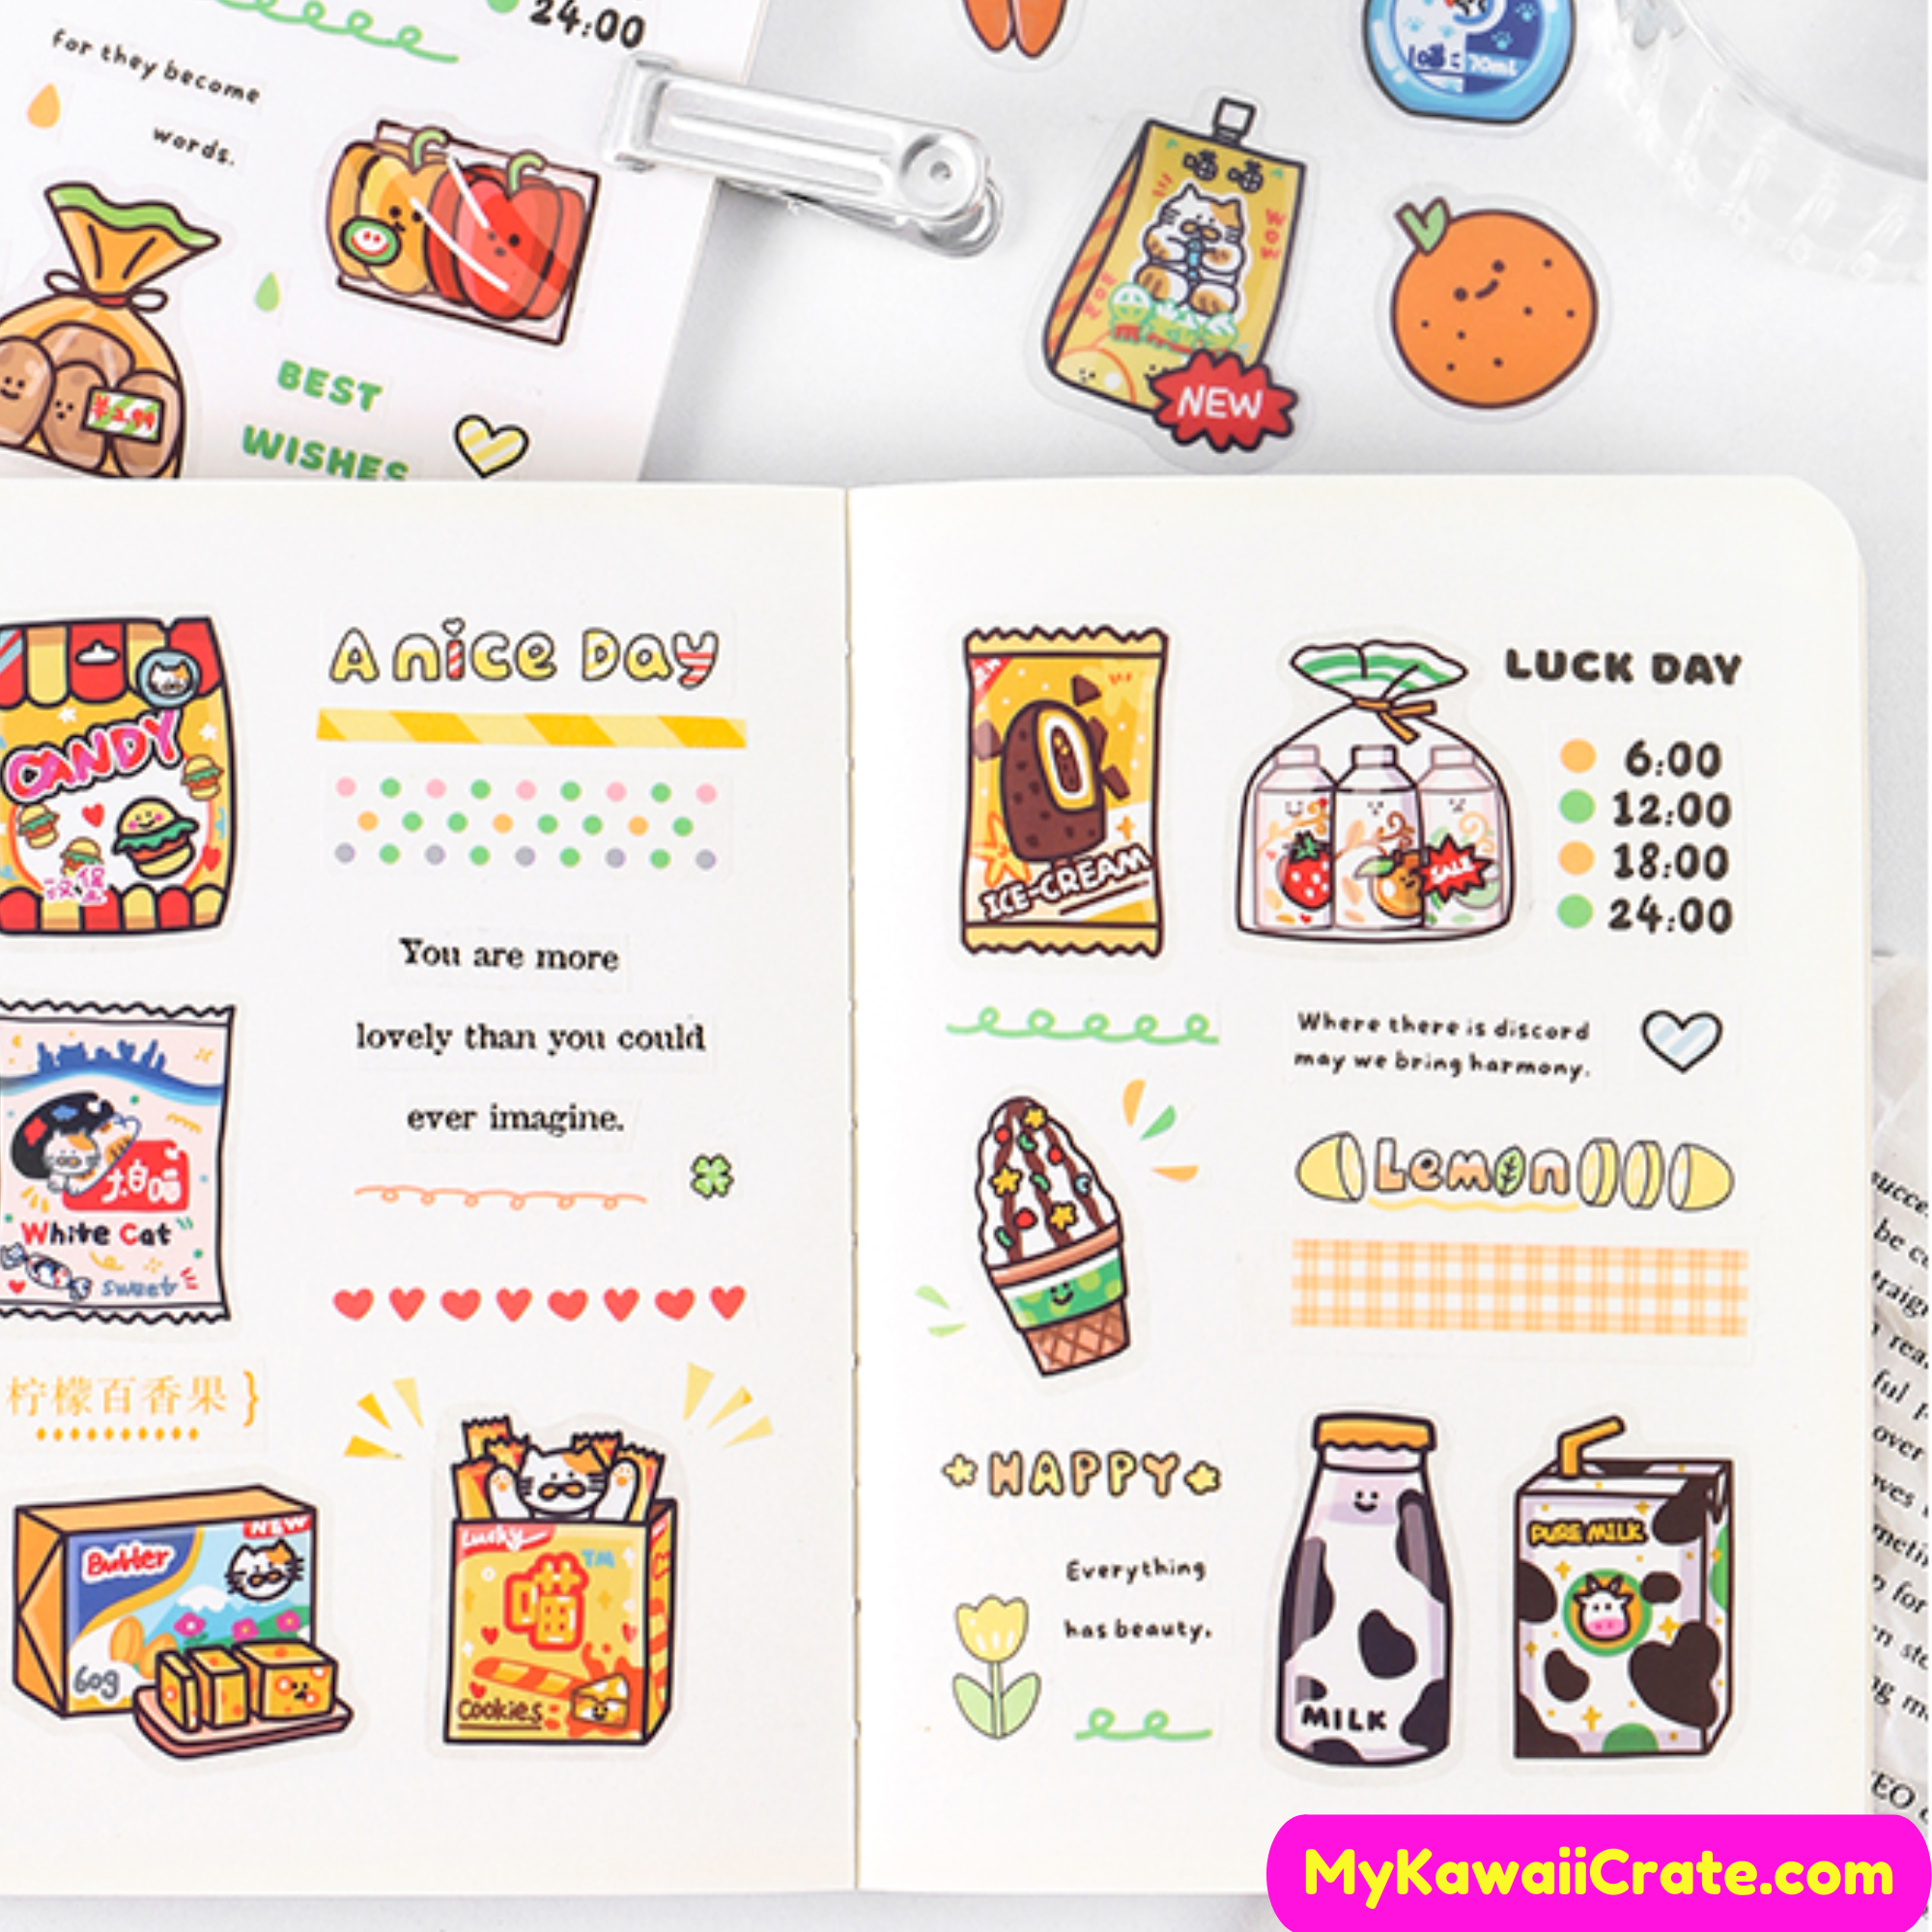 Cute Food Stickers, Decorative Stickers, Planner Stickers, Diary